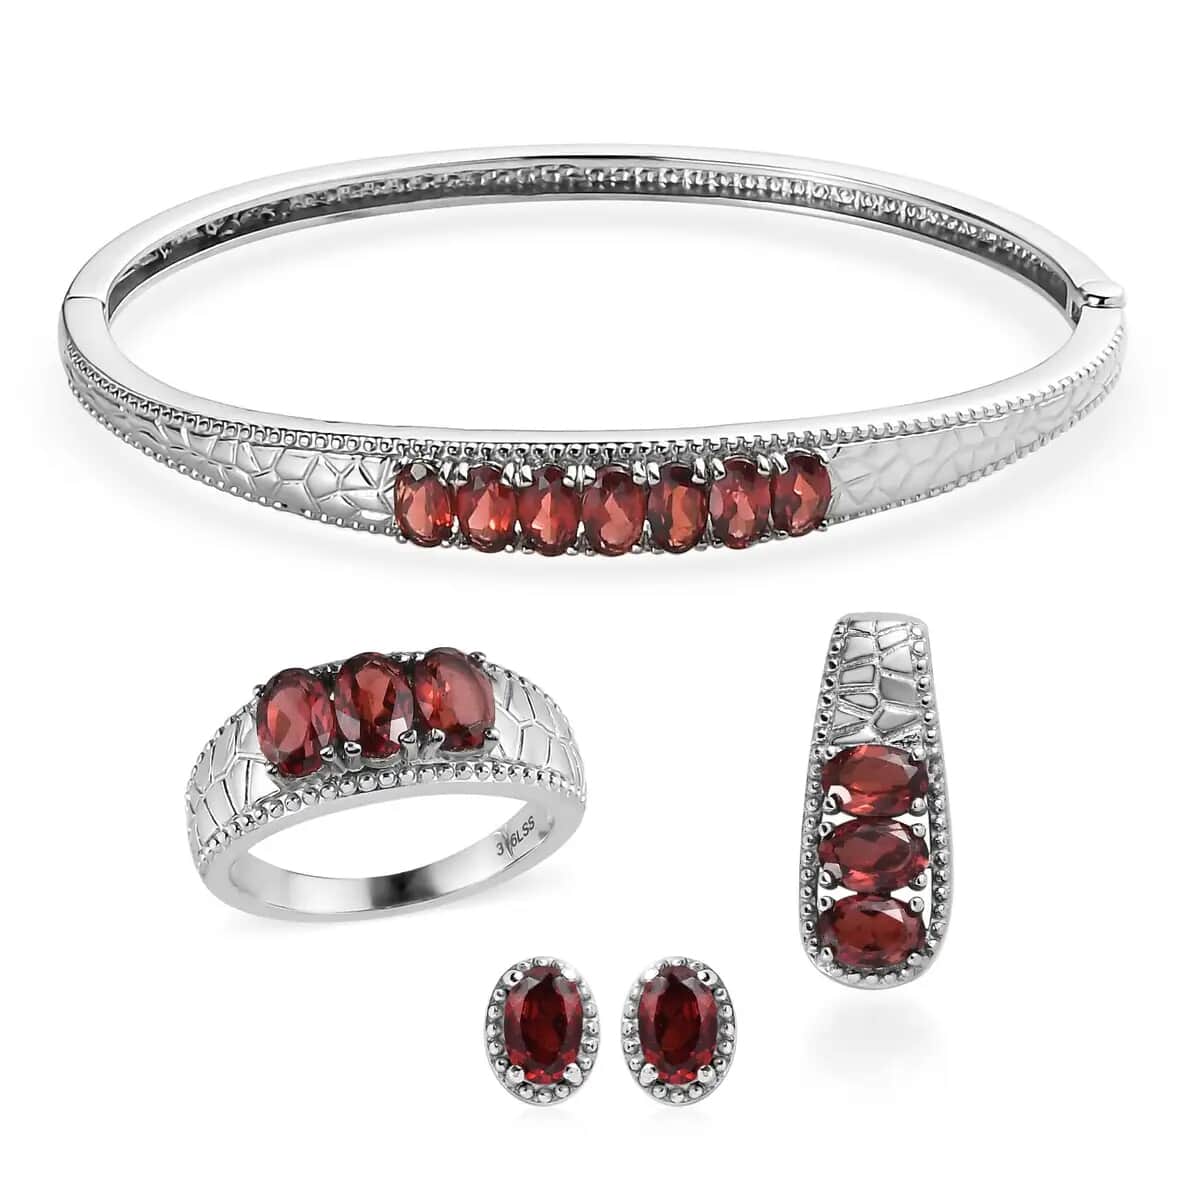 Mozambique Garnet Jewelry Set of Bangle Bracelet, 3 Stone Ring, Pendant and Stud Earrings, Stainless Steel Jewelry Set, Gifts For Her 8.25 ctw image number 0